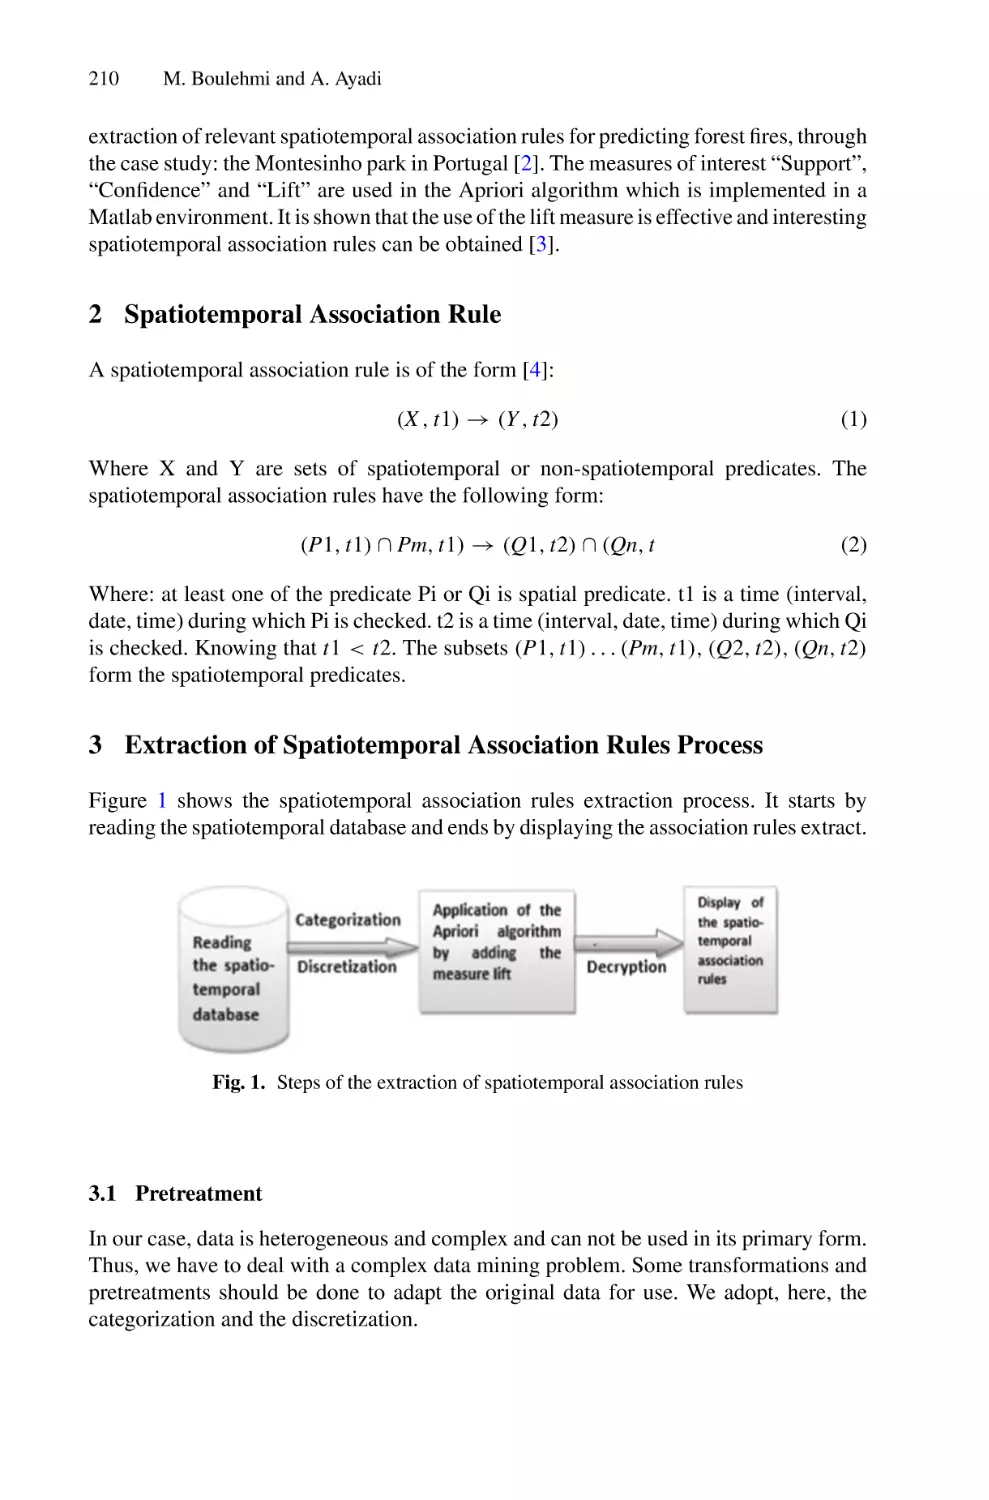 2 Spatiotemporal Association Rule
3 Extraction of Spatiotemporal Association Rules Process
3.1 Pretreatment